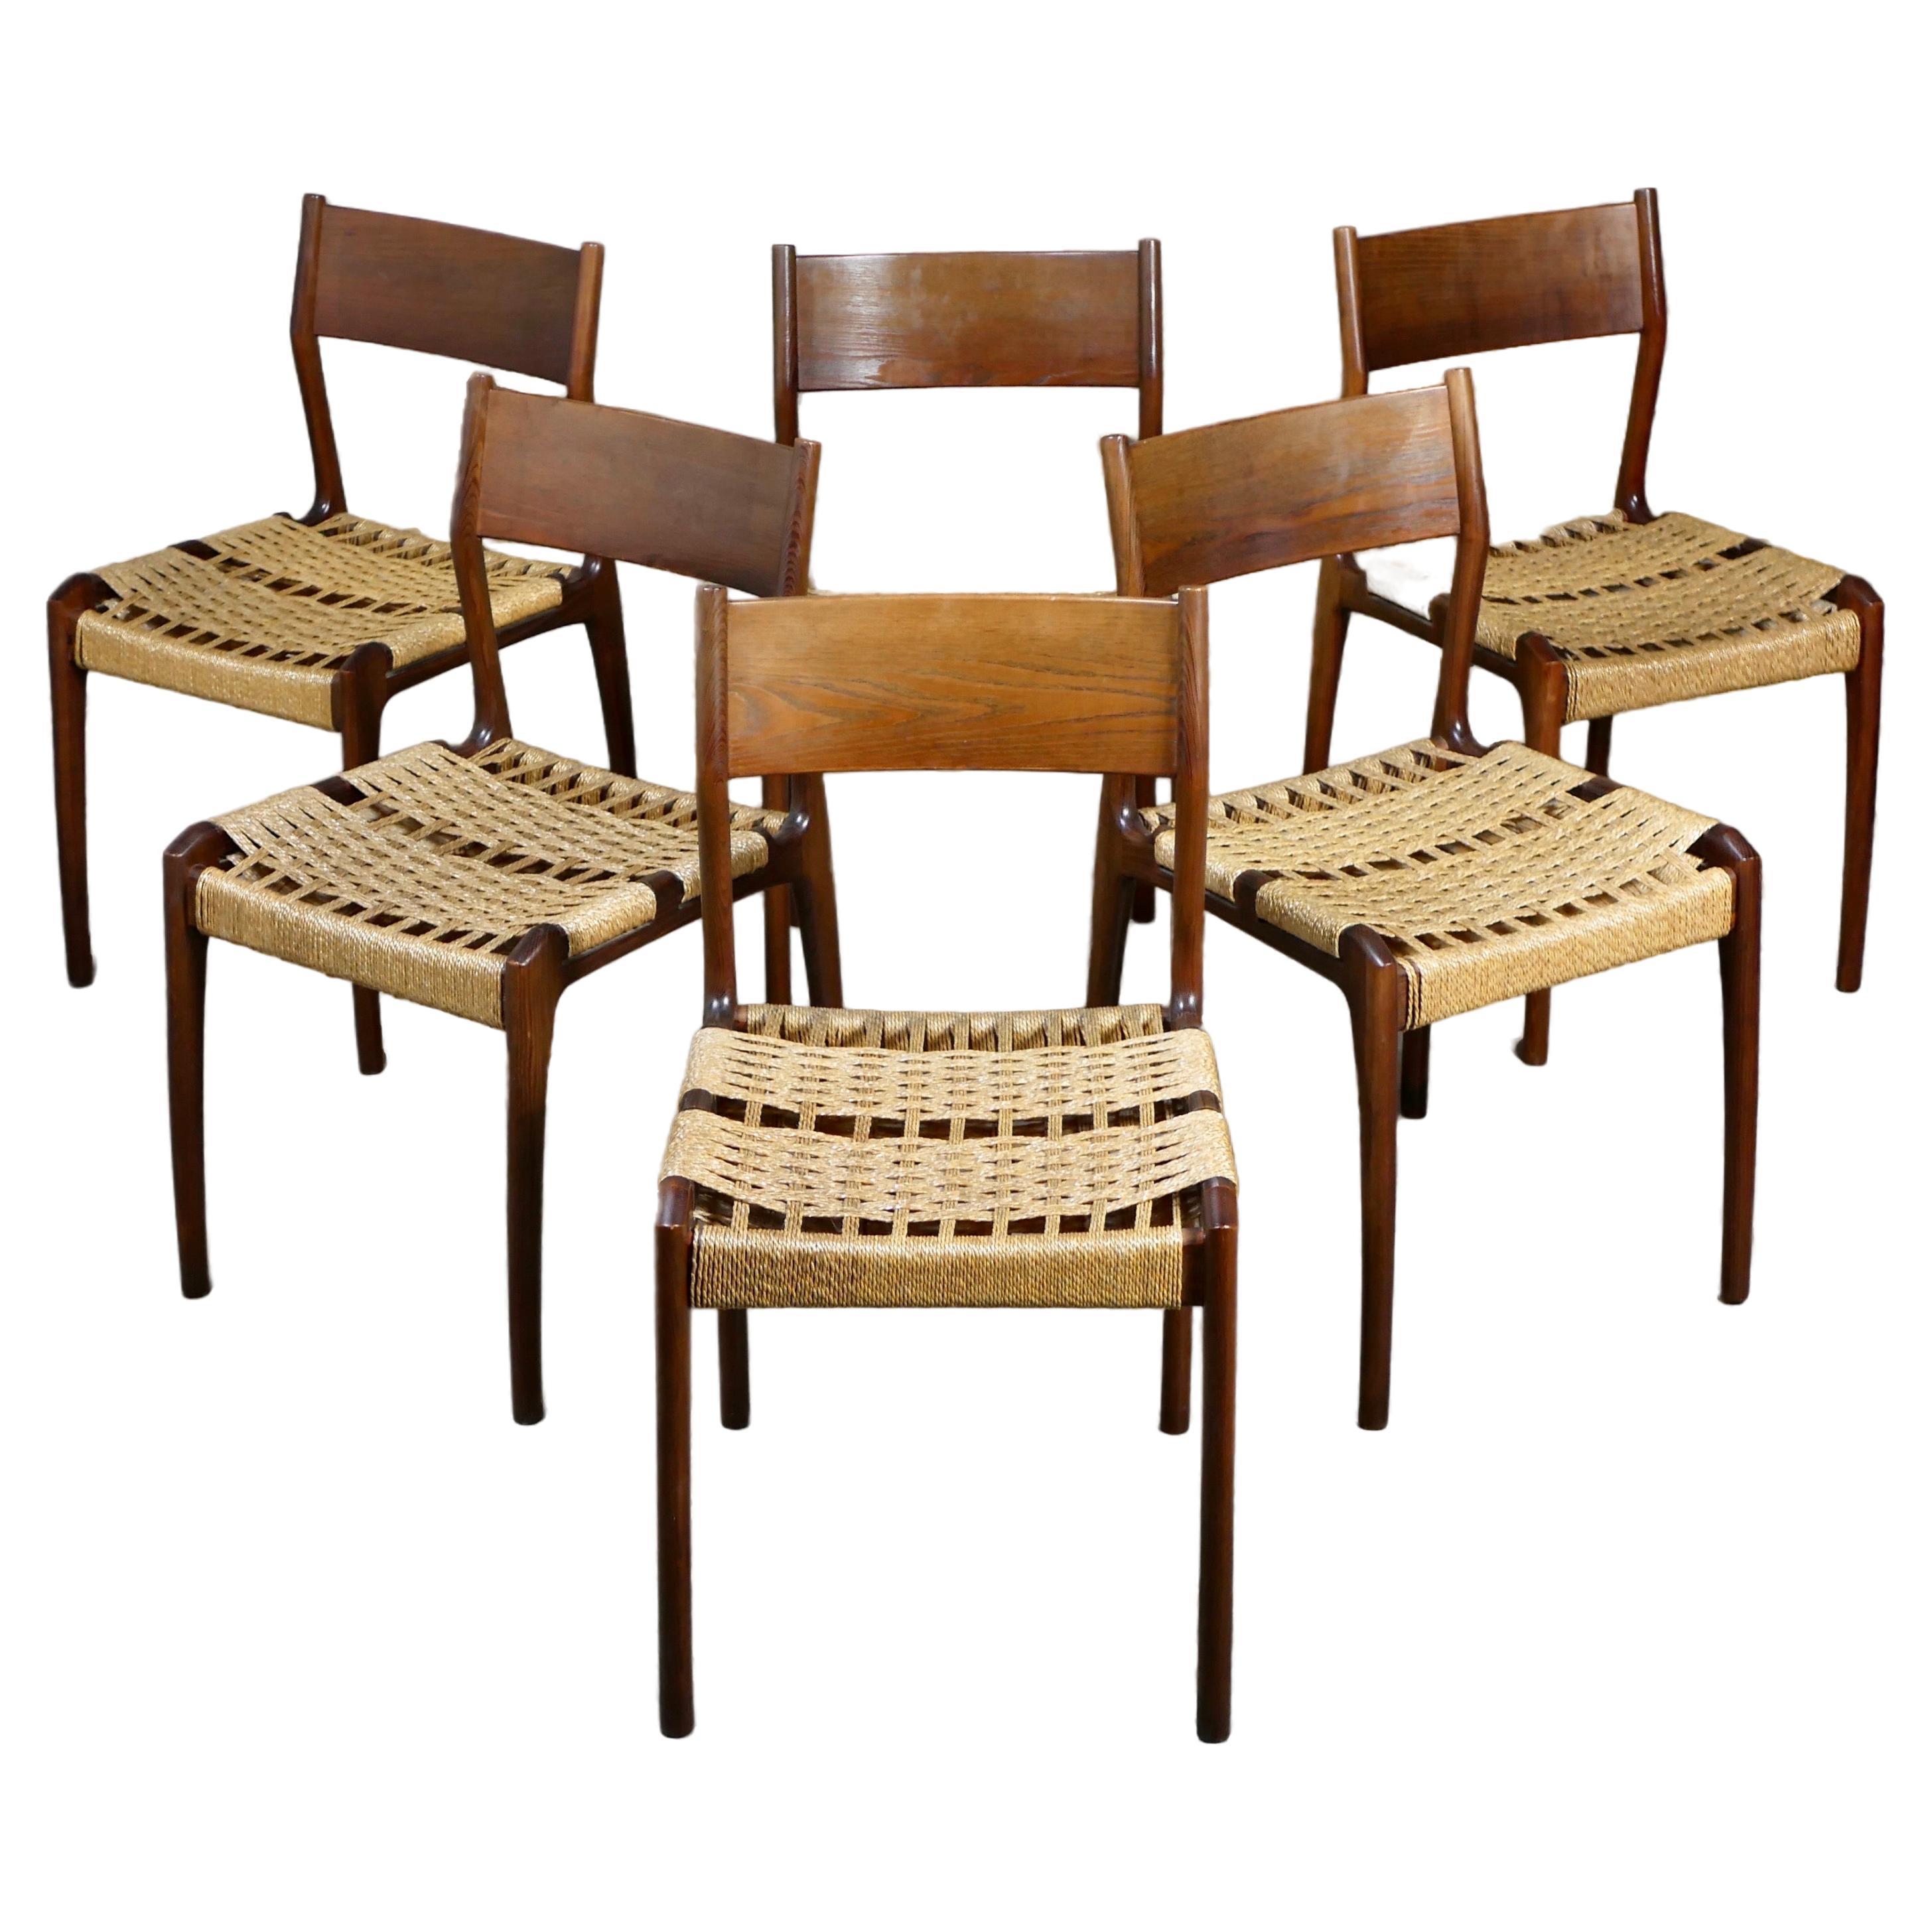 Gorgeous set of 6 Italian chairs by the Consorzio Sedie Friuli, made in the 1960s in Frioul region (back then capital of the Italian chair).
Oak wood and straw? 
Very good condition, few missing straw, barely visible.
Elegant and light, with a nice